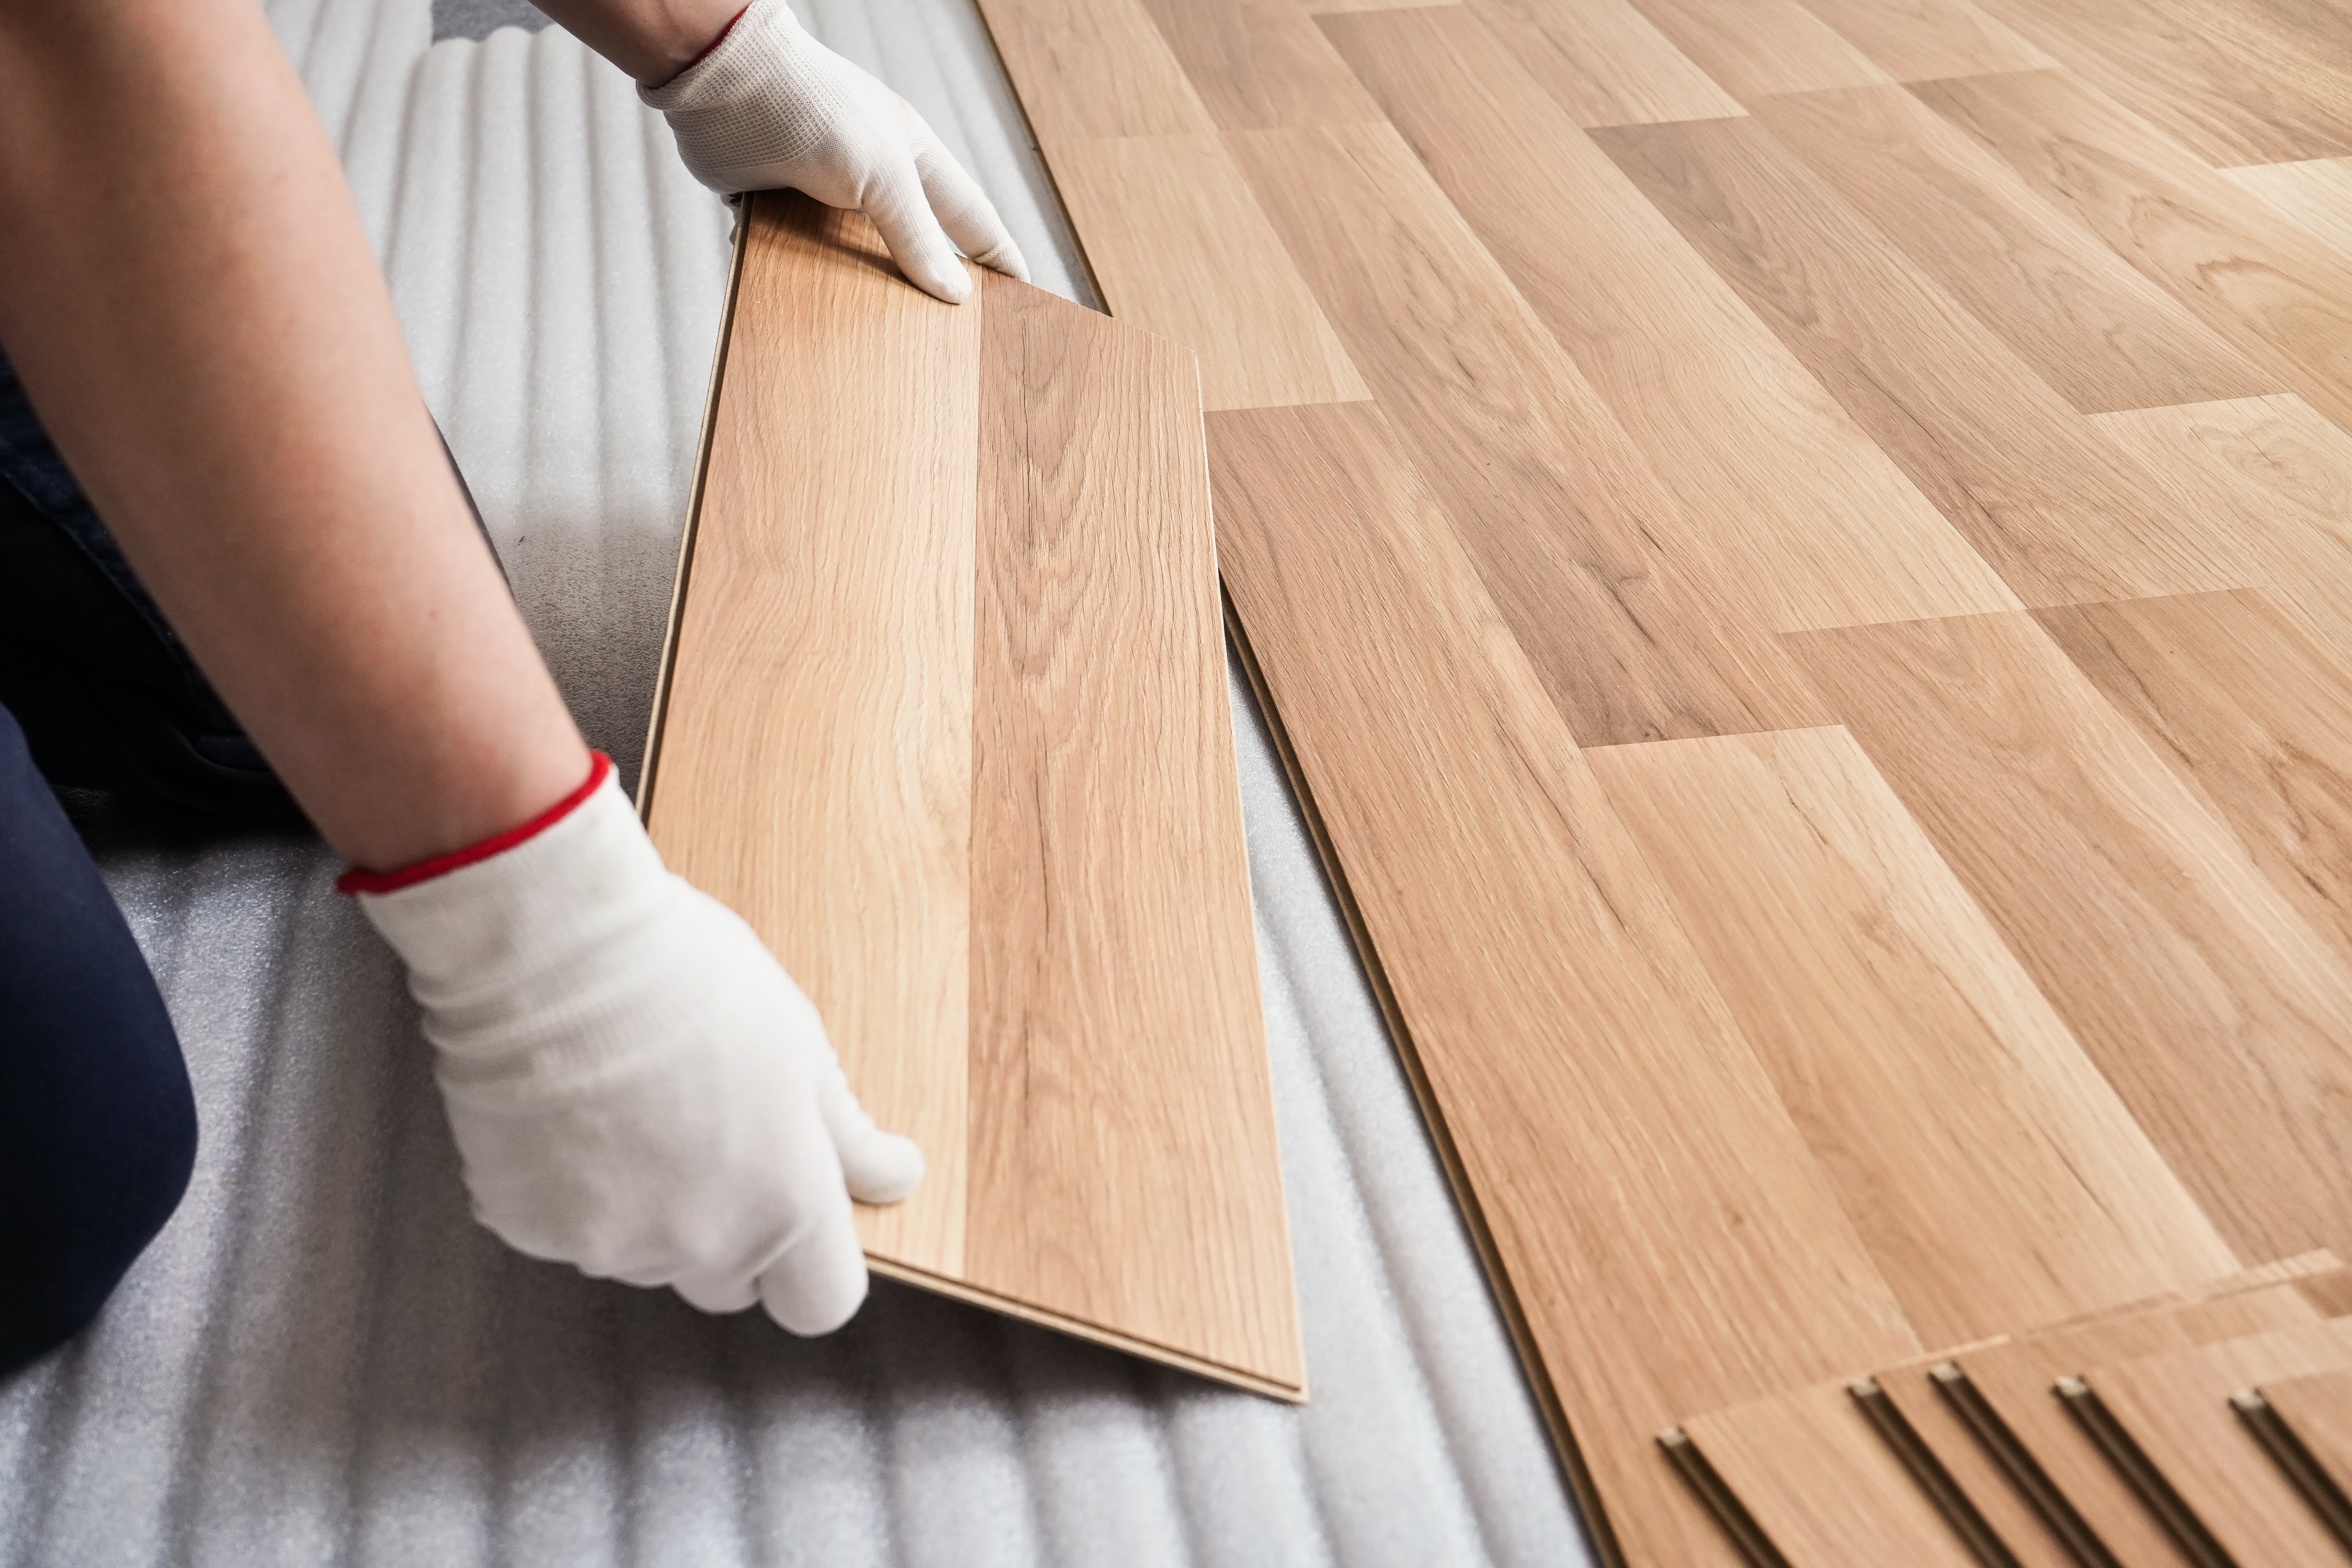 How to stop a bed moving: Laminate floor